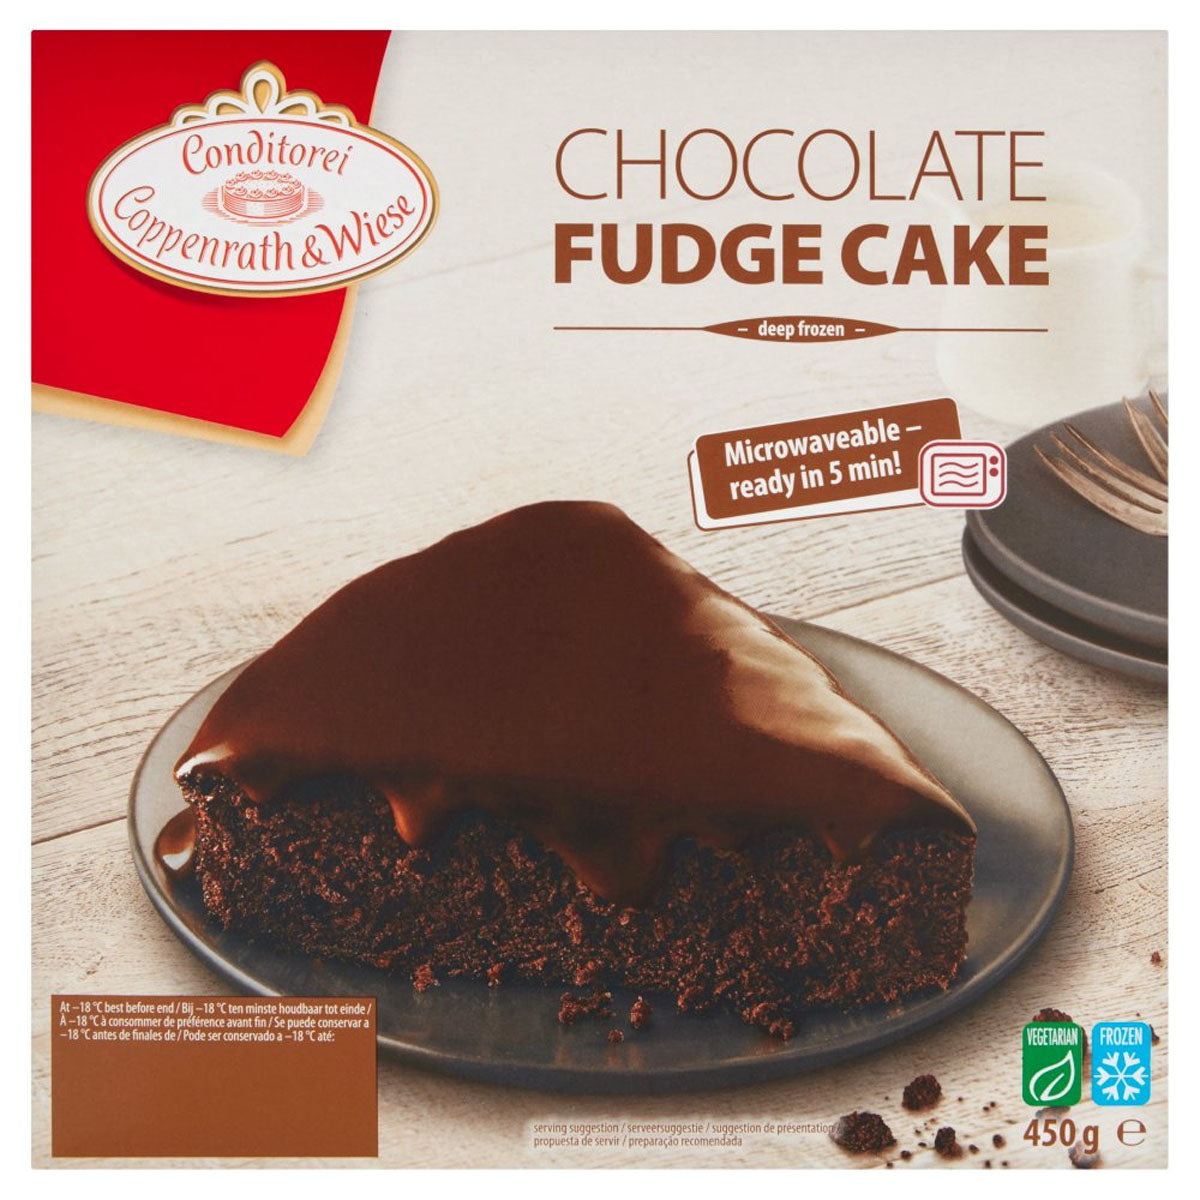 Conditorei Coppenrath & Wiese - Chocolate Fudge Cake - 450g - Continental Food Store